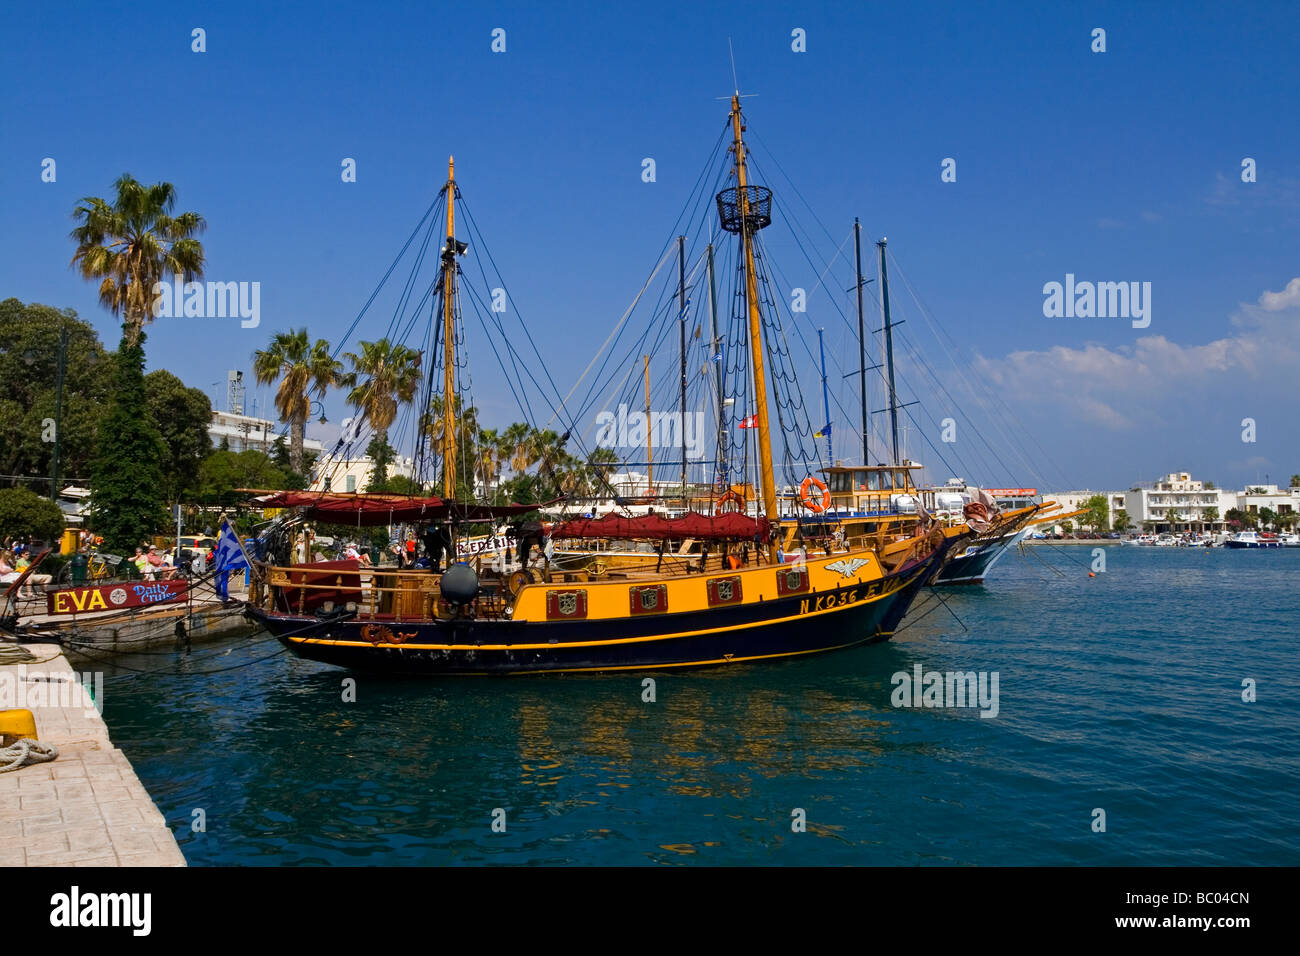 View of the harbour at Kos Town on the Greek island of Kos in the Dodecanese with cruise vessels visible Stock Photo